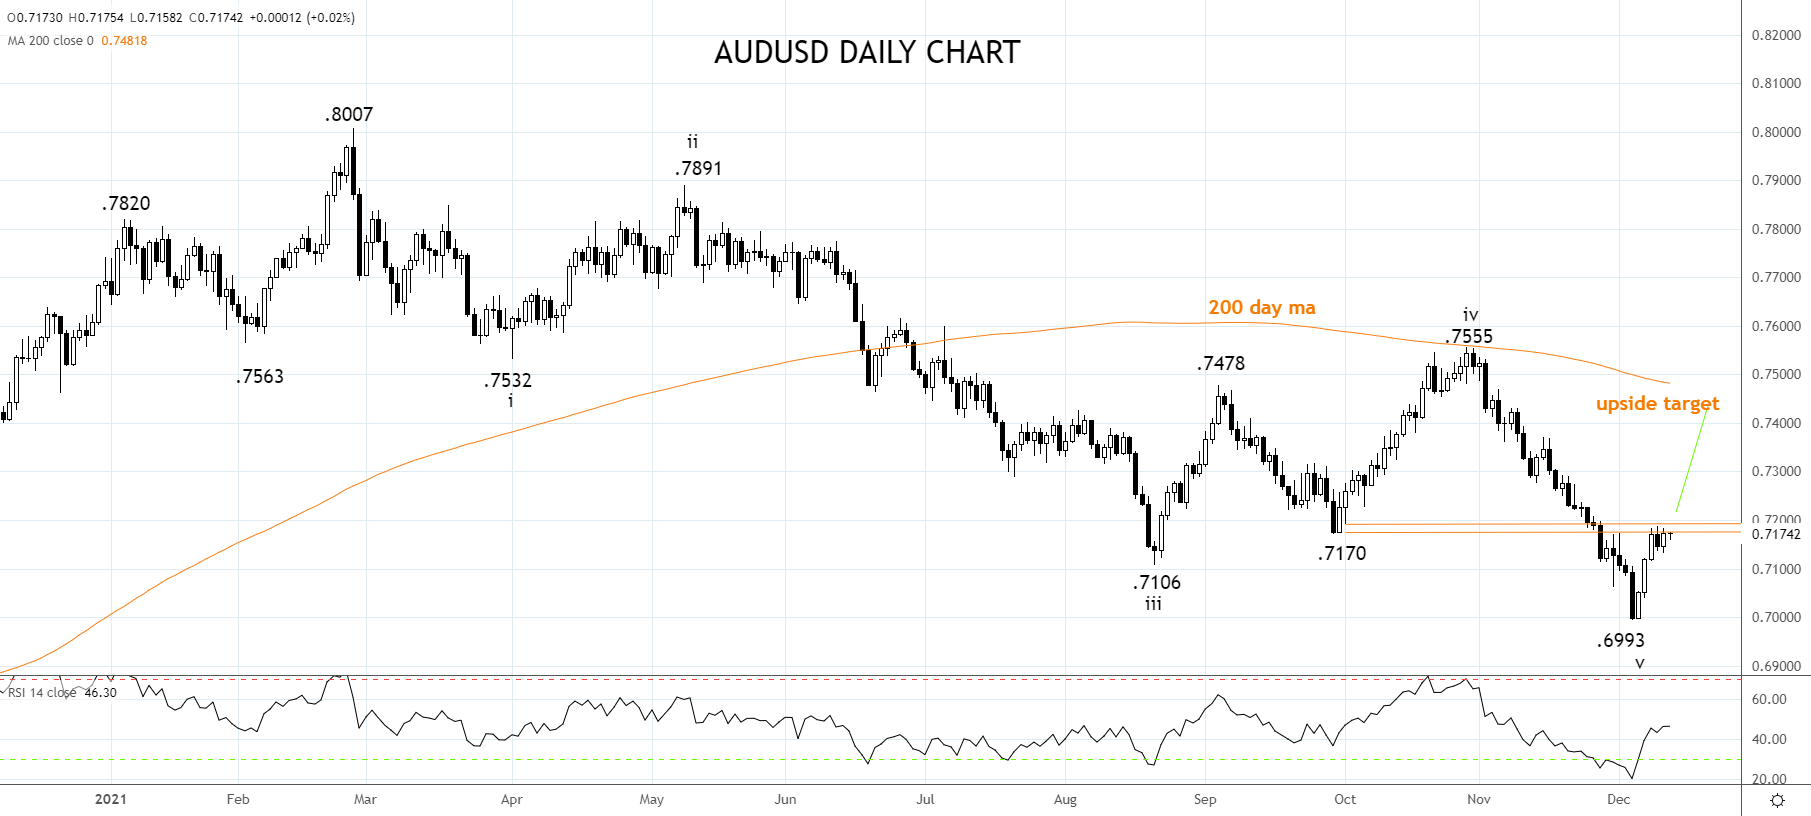 AUDUSD Daily Chart 13th of Dec